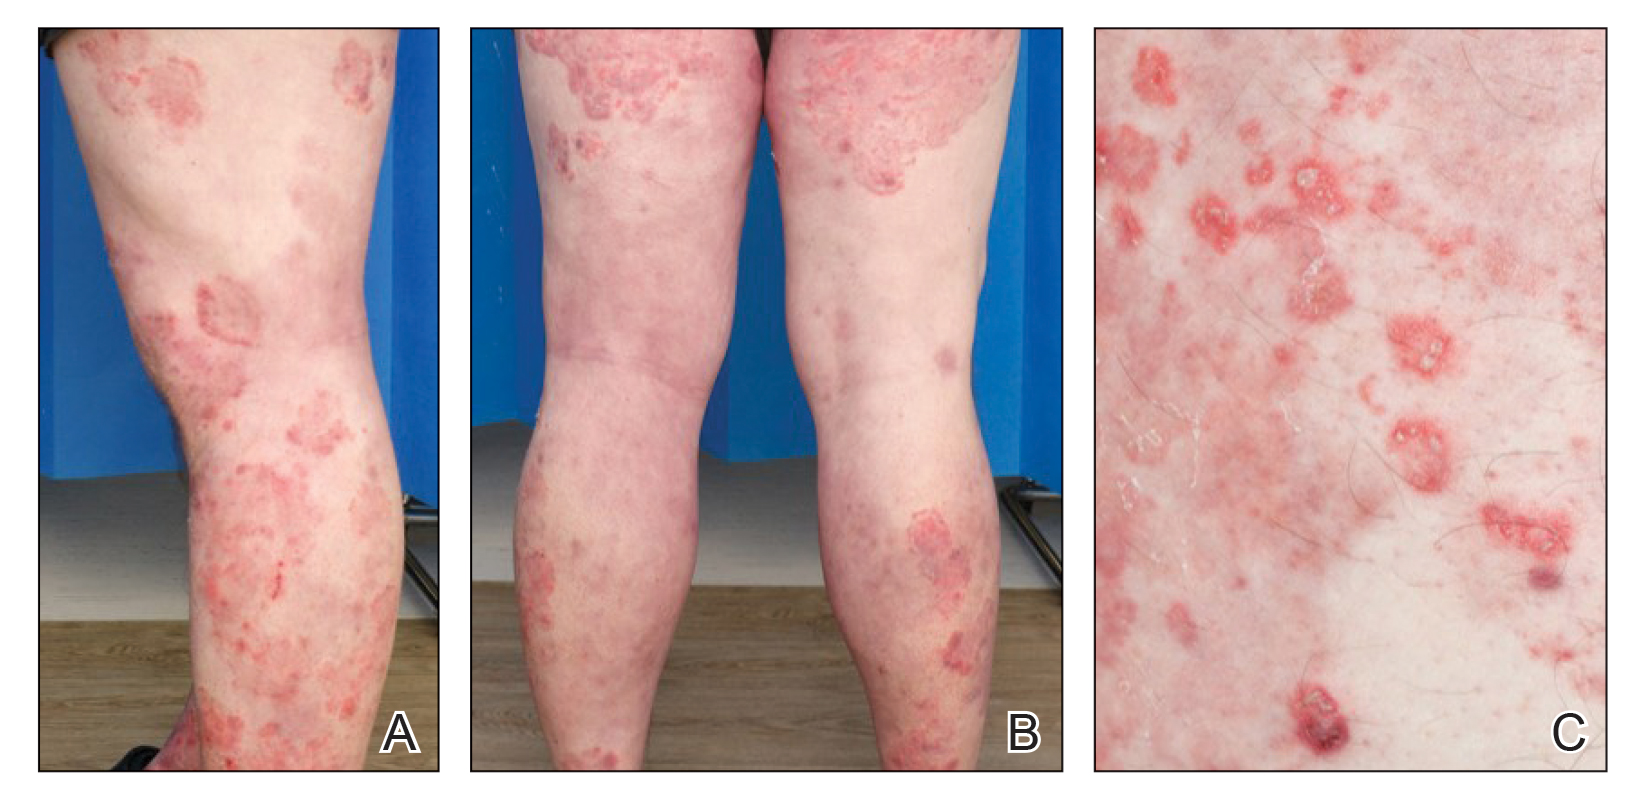 Widespread red annular plaques on the legs